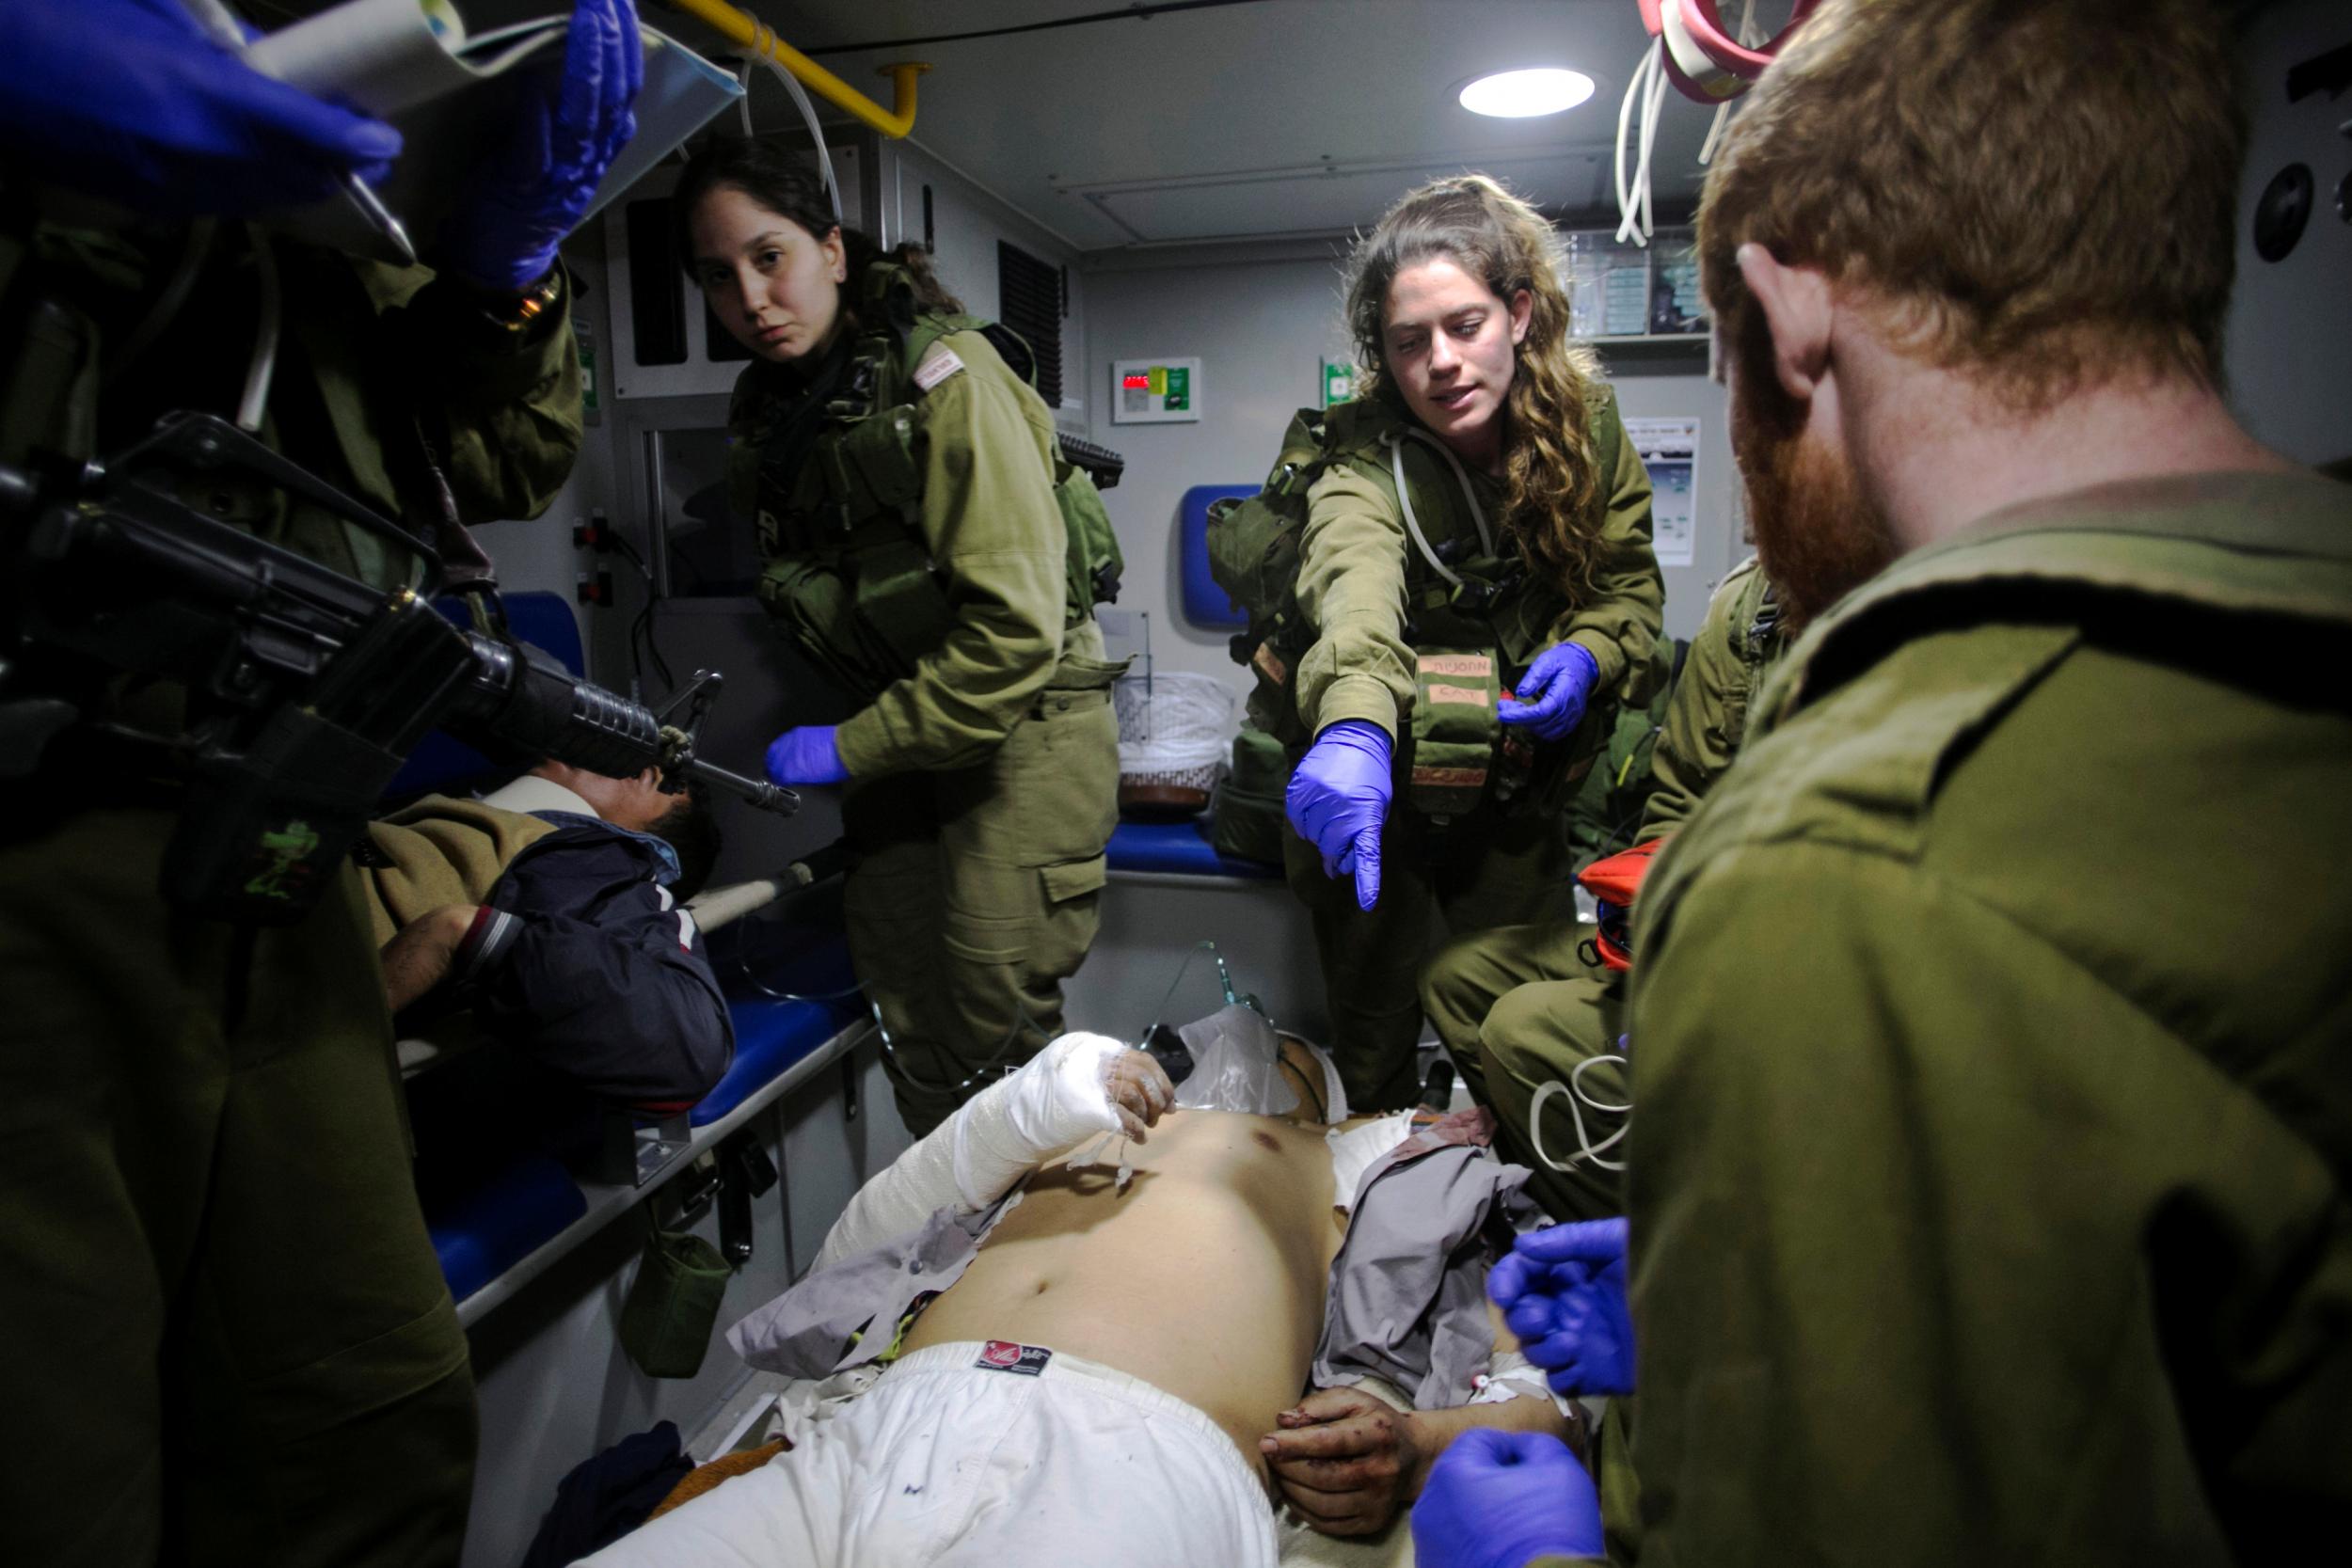 Israeli soldiers give initial medical treatment to wounded Syrians in the Israeli-occupied Golan Heights on 18 January 2017